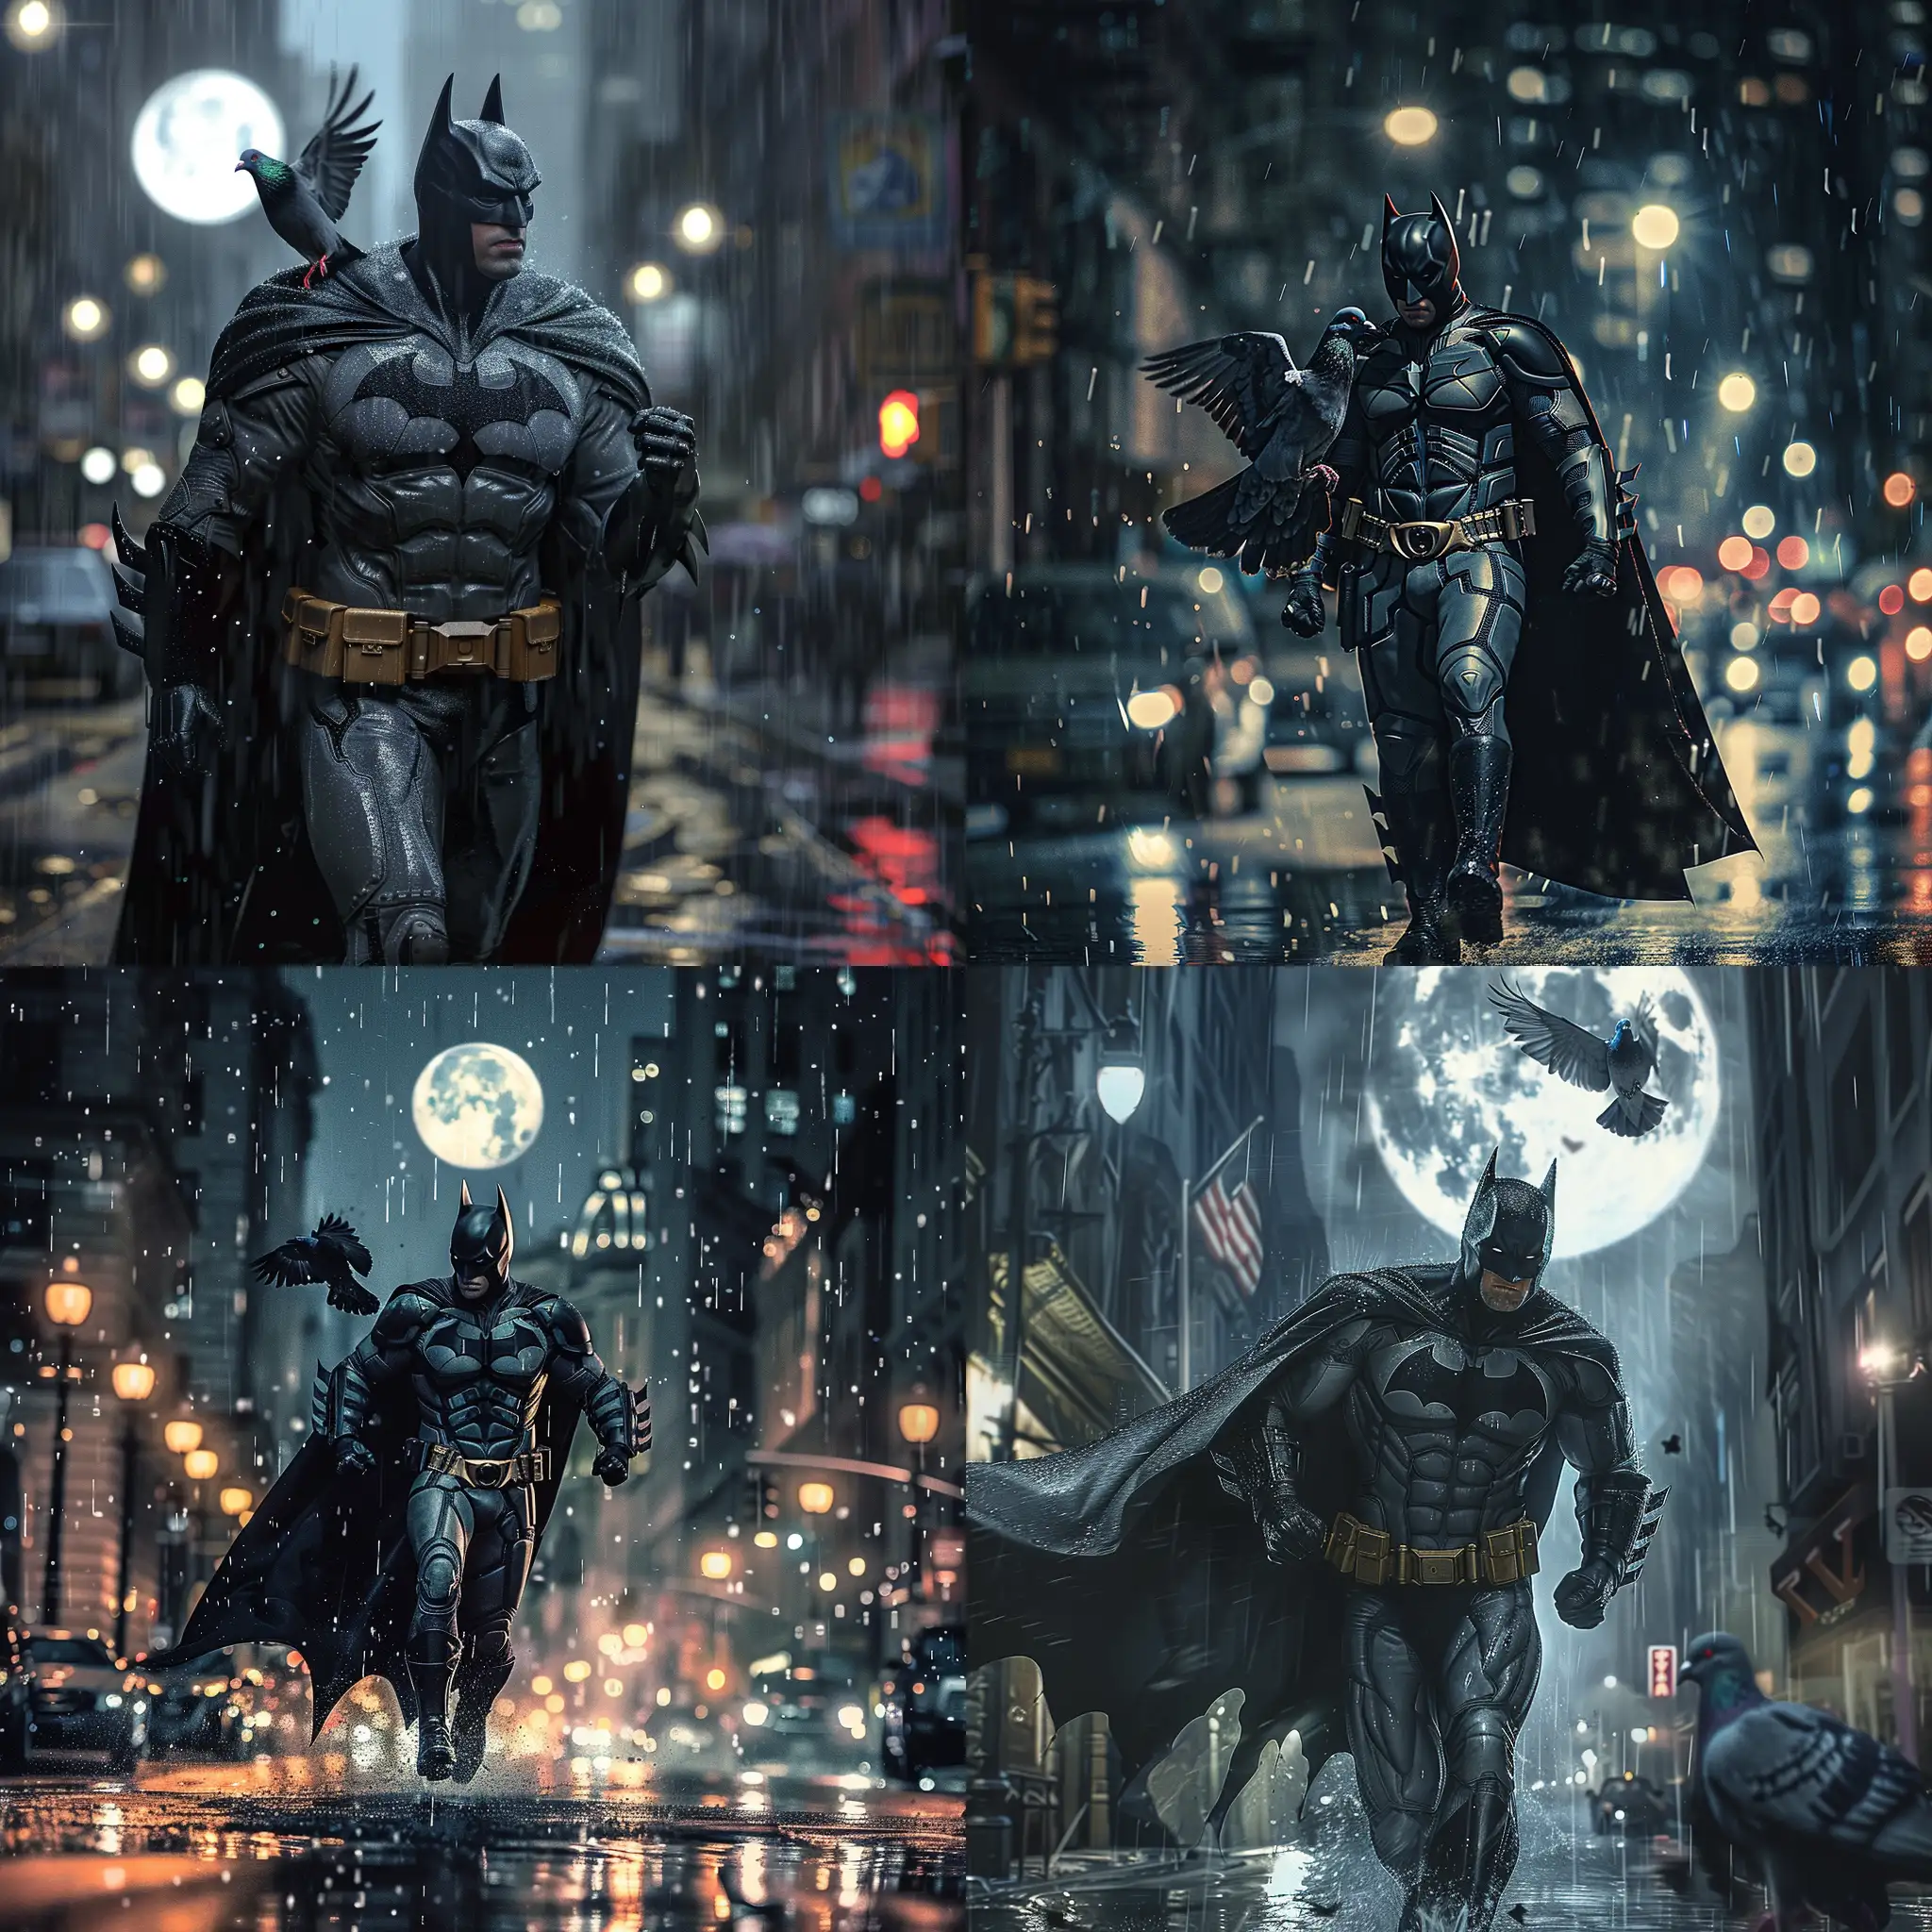 Batman rushing down the street with a pigeon on his shoulder at night in the rain with a full moon, low angle heroic shot